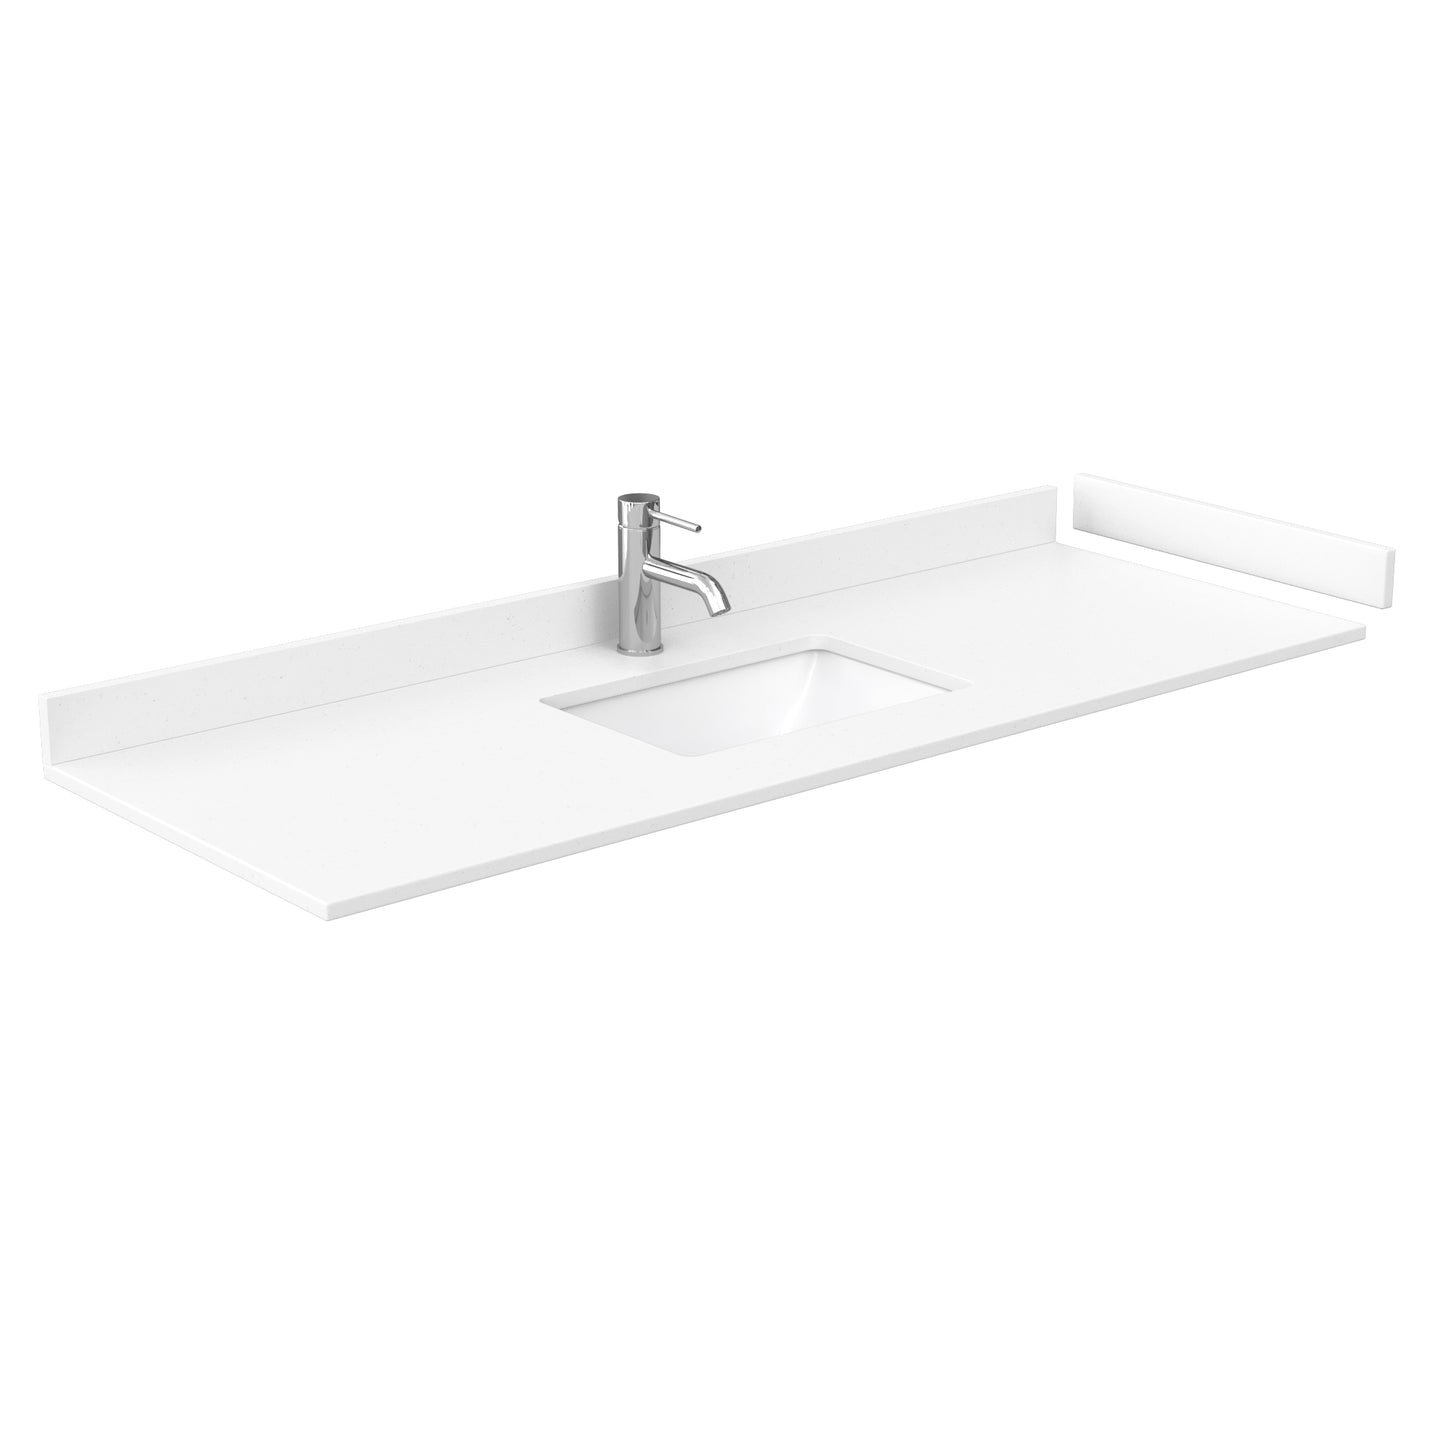 Wyndham Icon 60 Inch Single Bathroom Vanity in White with White Cultured Marble Countertop, Undermount Square Sink and Satin Bronze Trim - Luxe Bathroom Vanities